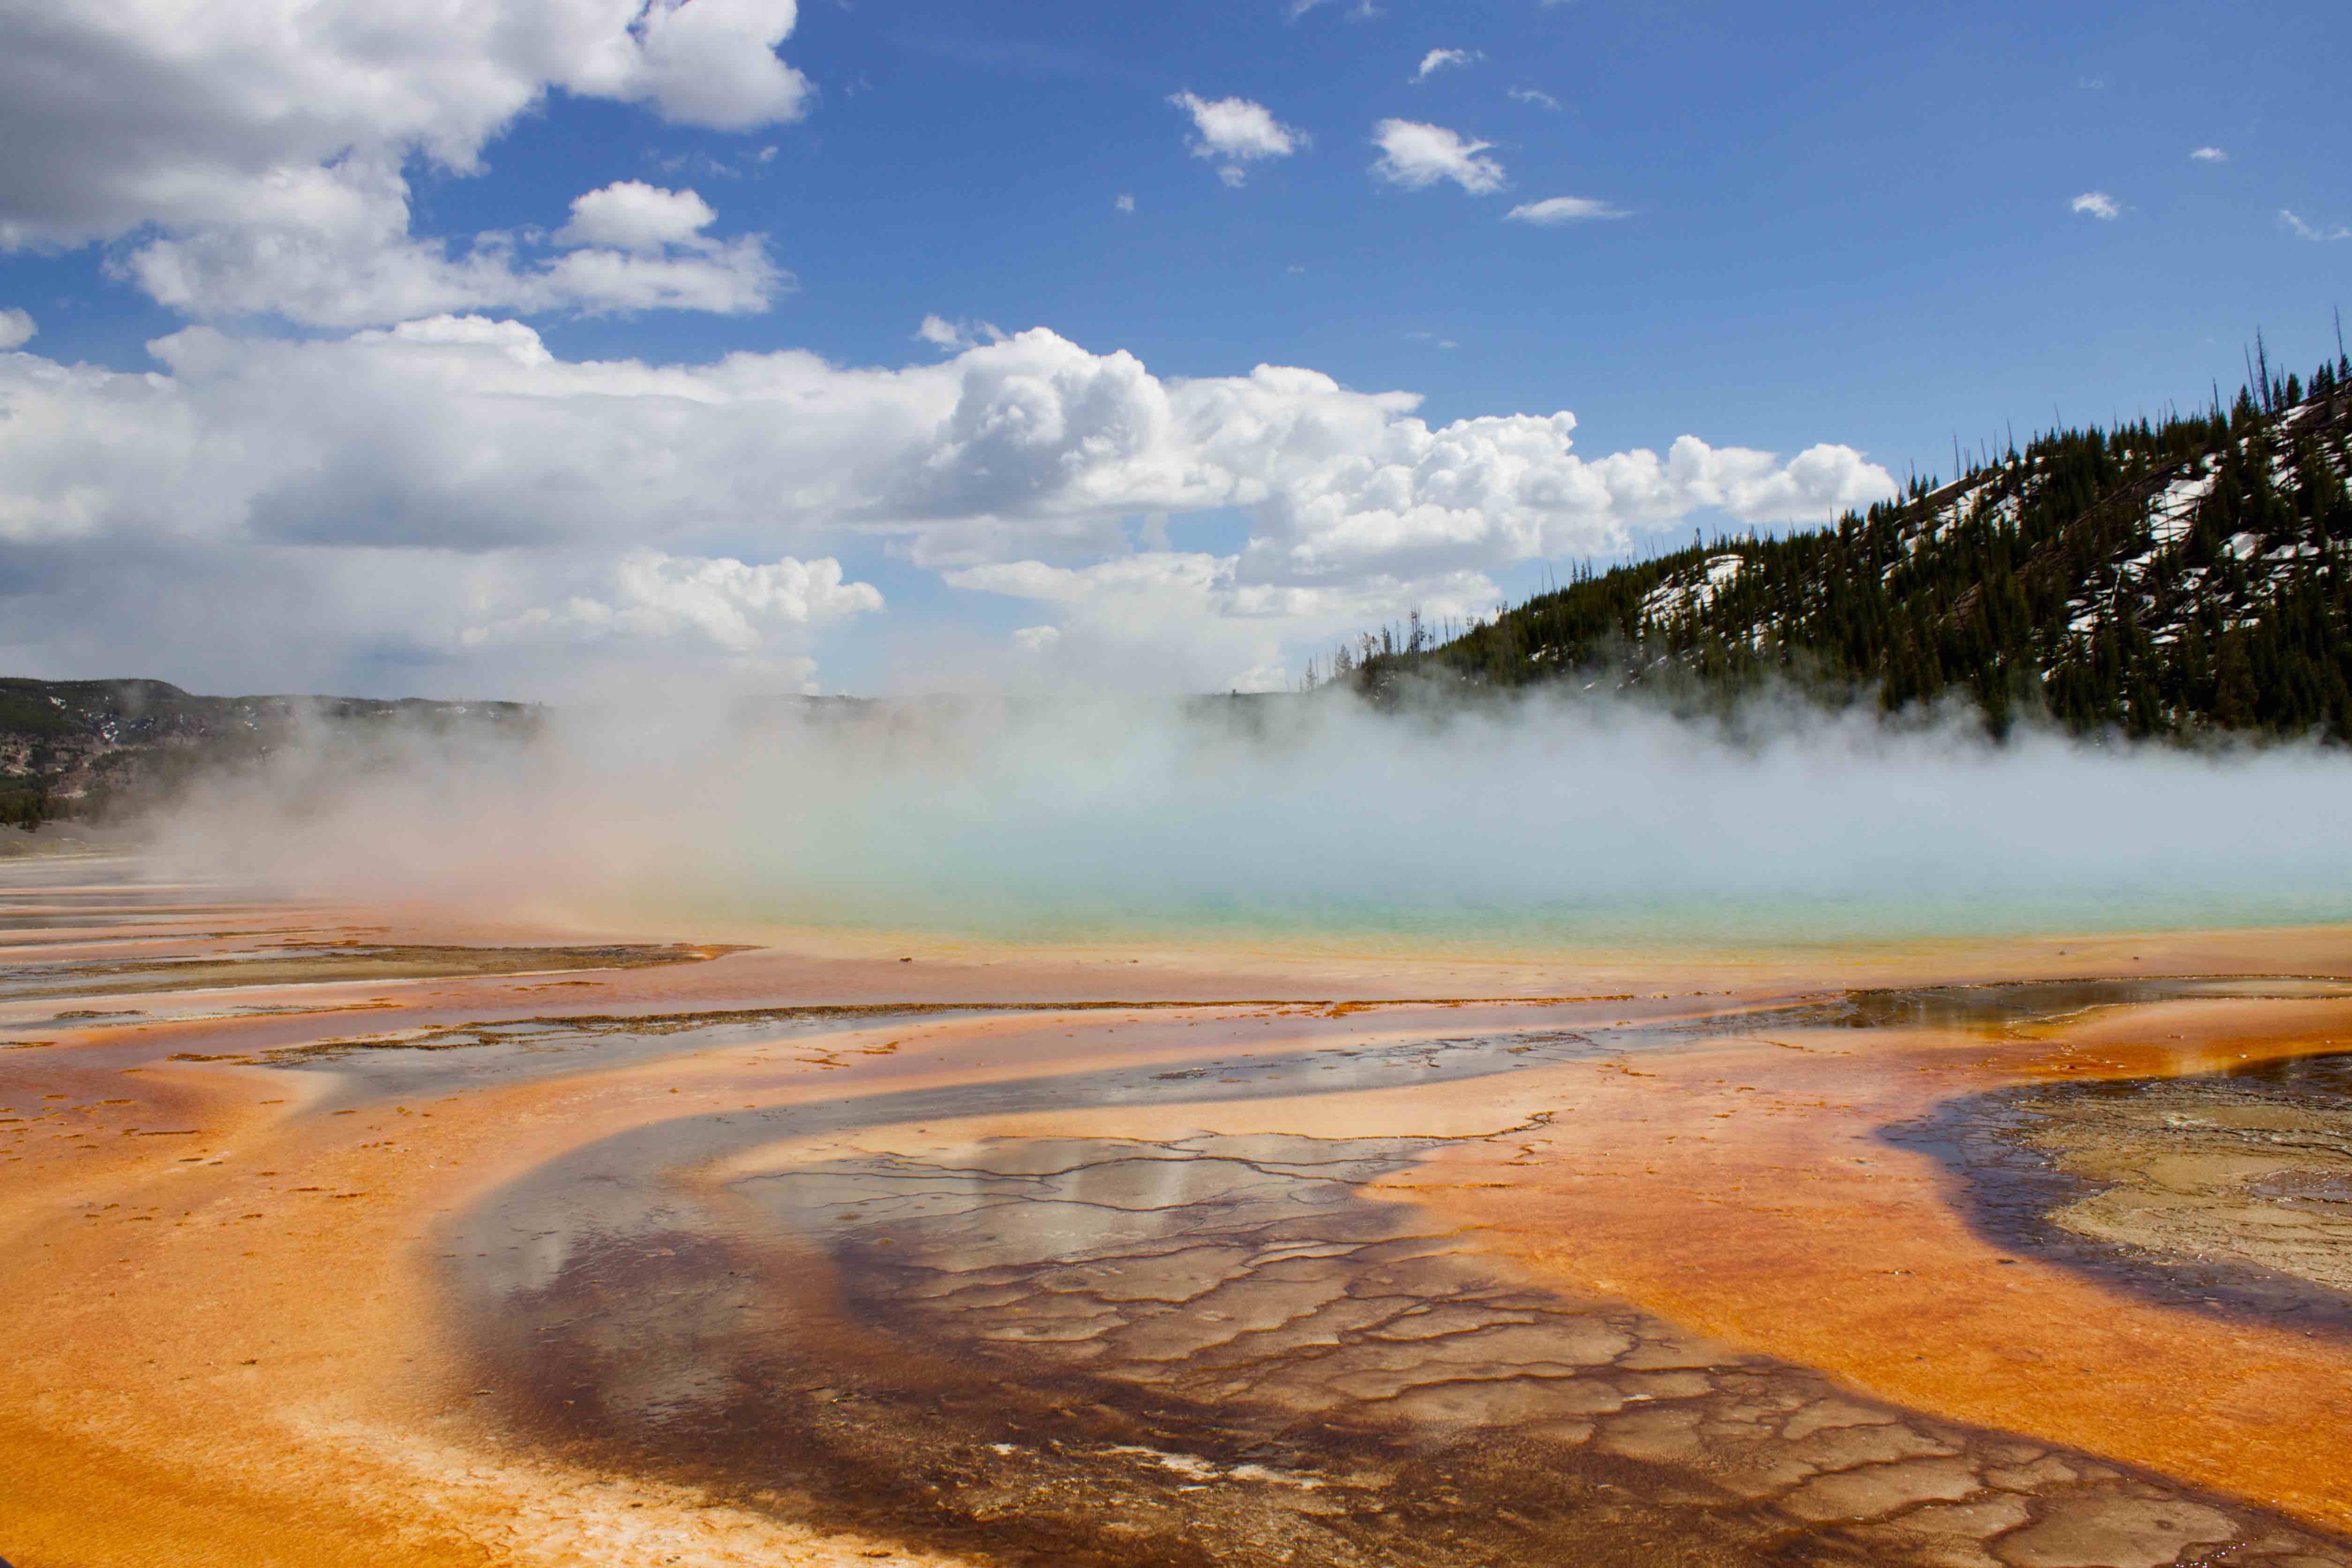 Microbial Mats at Grand Prismatic Springs - Photo Cred E. Boyd